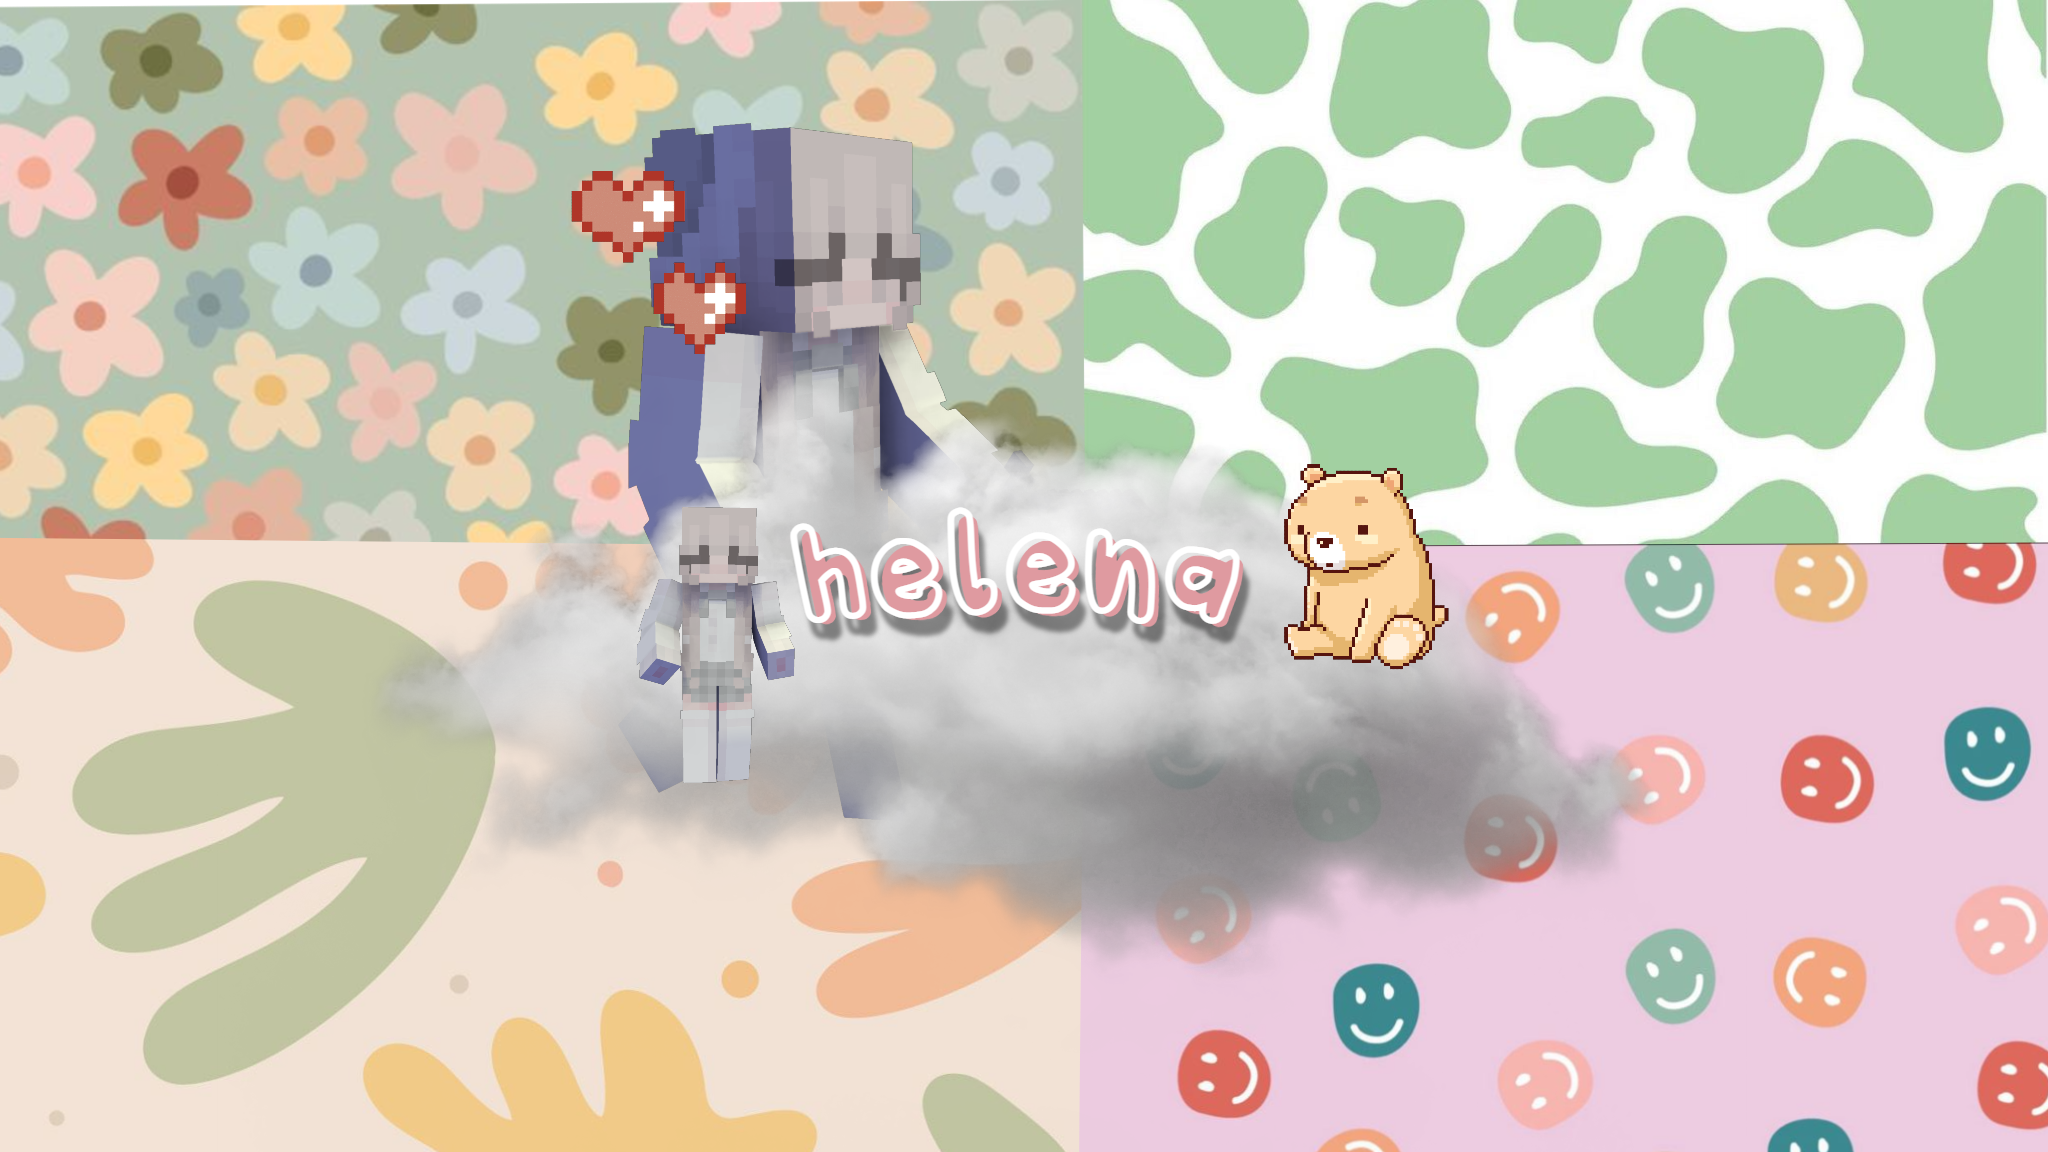 _xhelena's Profile Picture on PvPRP